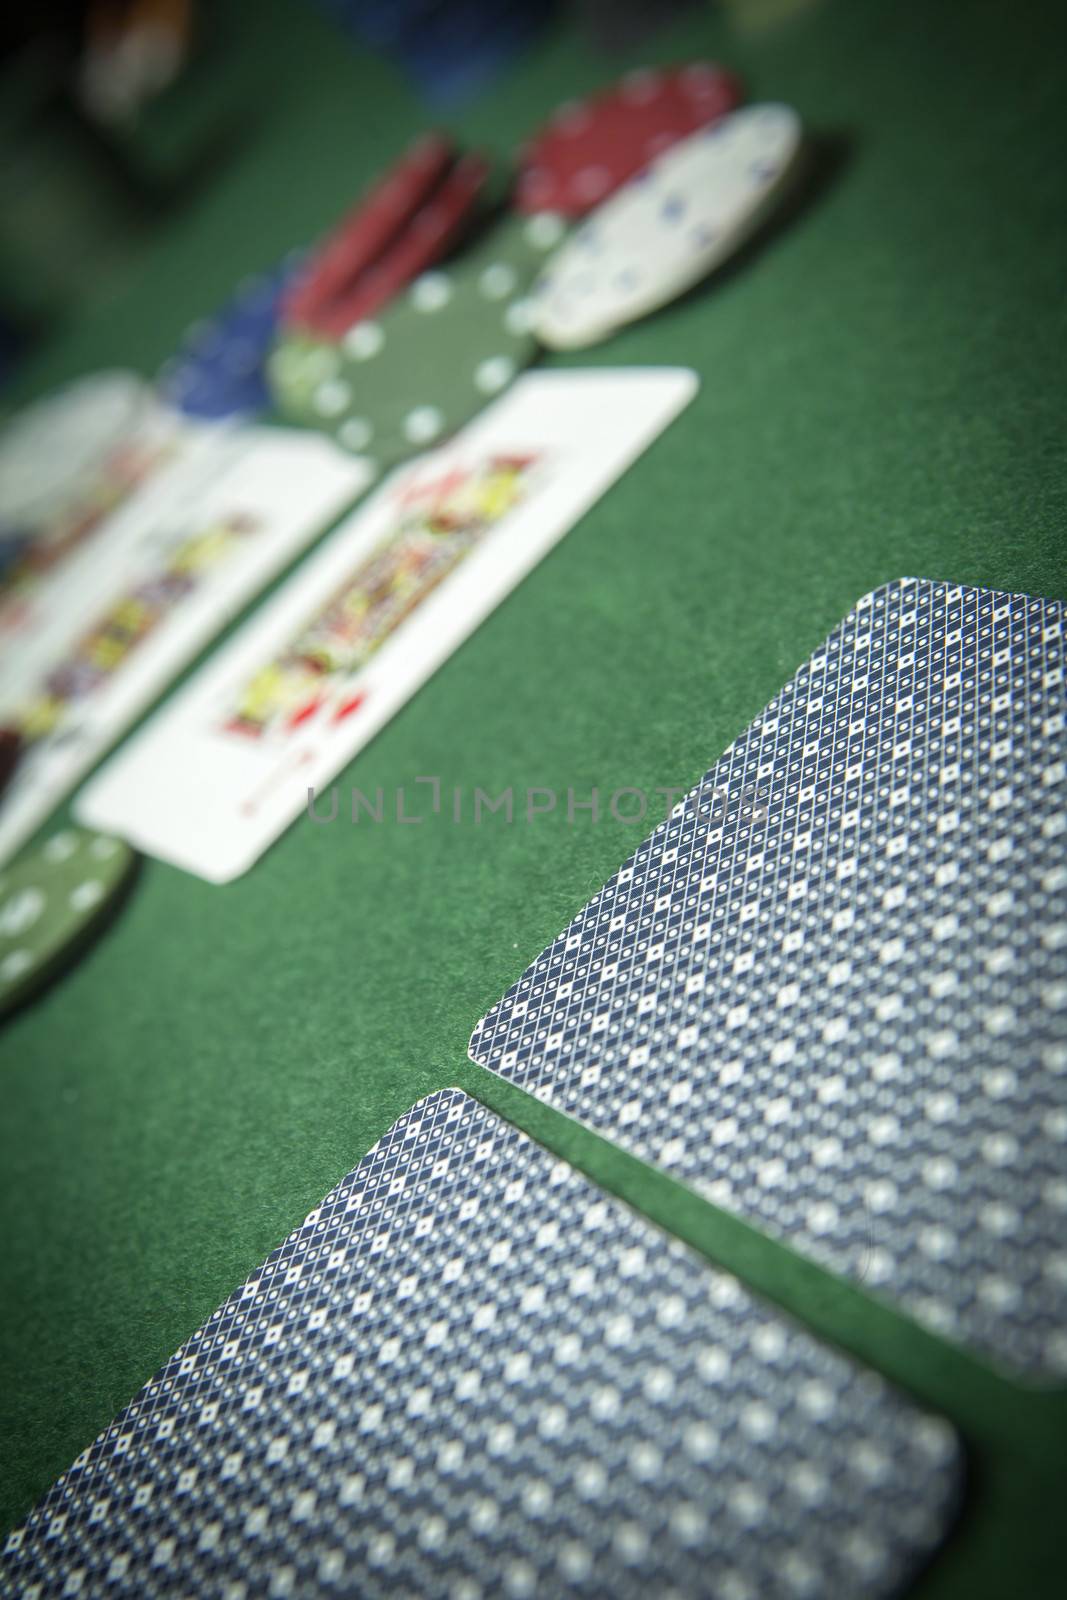 cards poker deck English, poker chips stack on green table  by digicomphoto